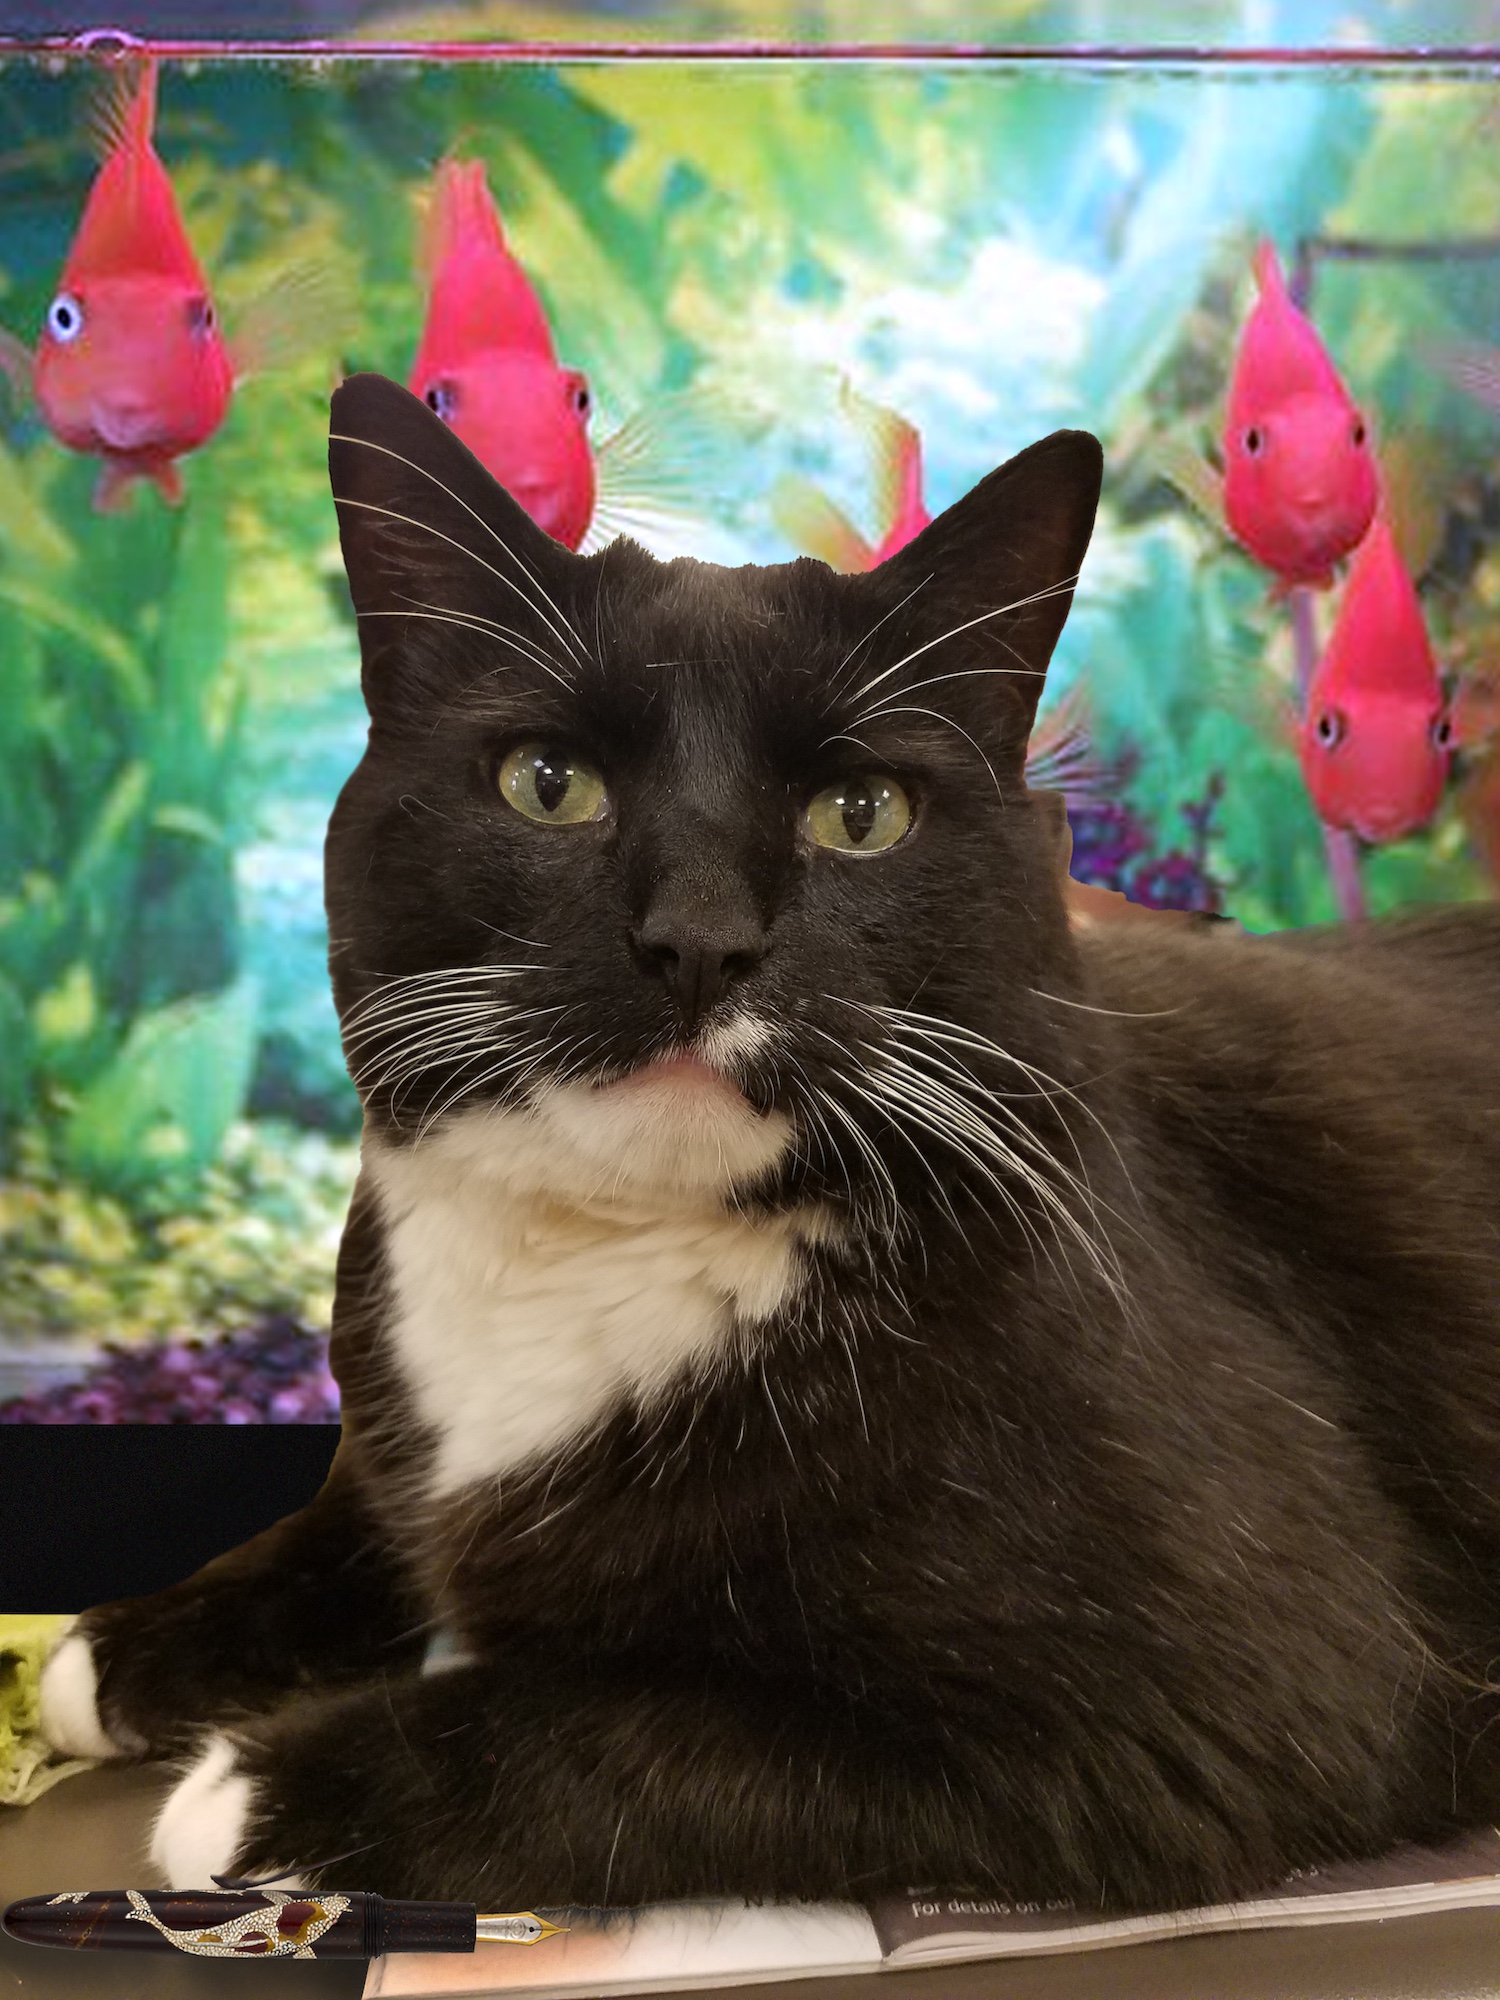 Cosmo is photoshopped in front of a fishtank full of bright pink fish.